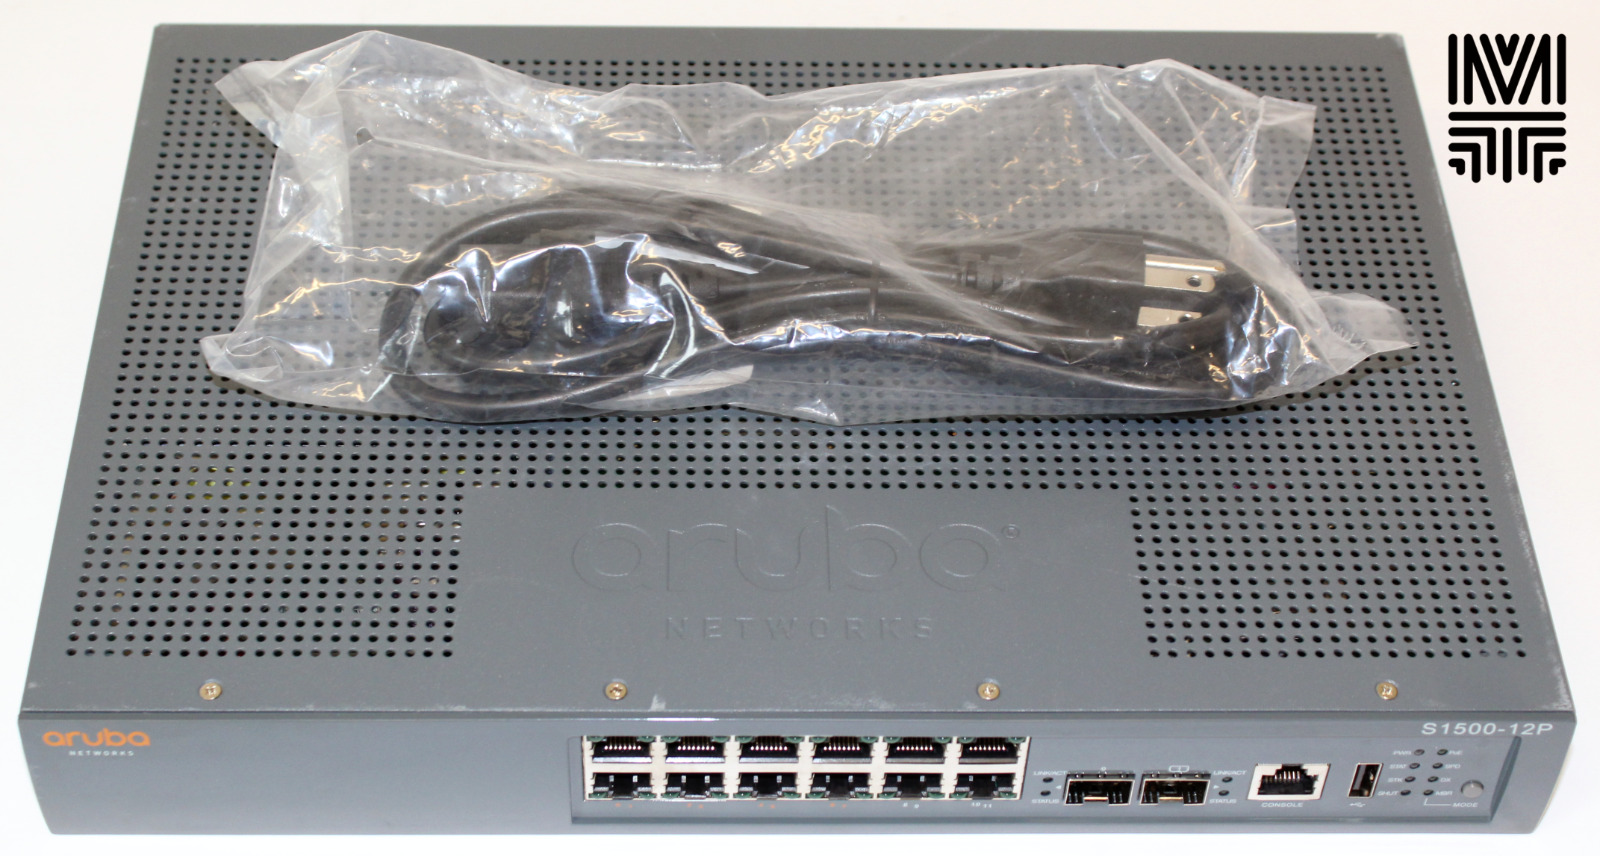 Aruba S1500 S1500-12P 12-Port Mobility Access GigE PoE+ Switch, ARSW1512, Tested